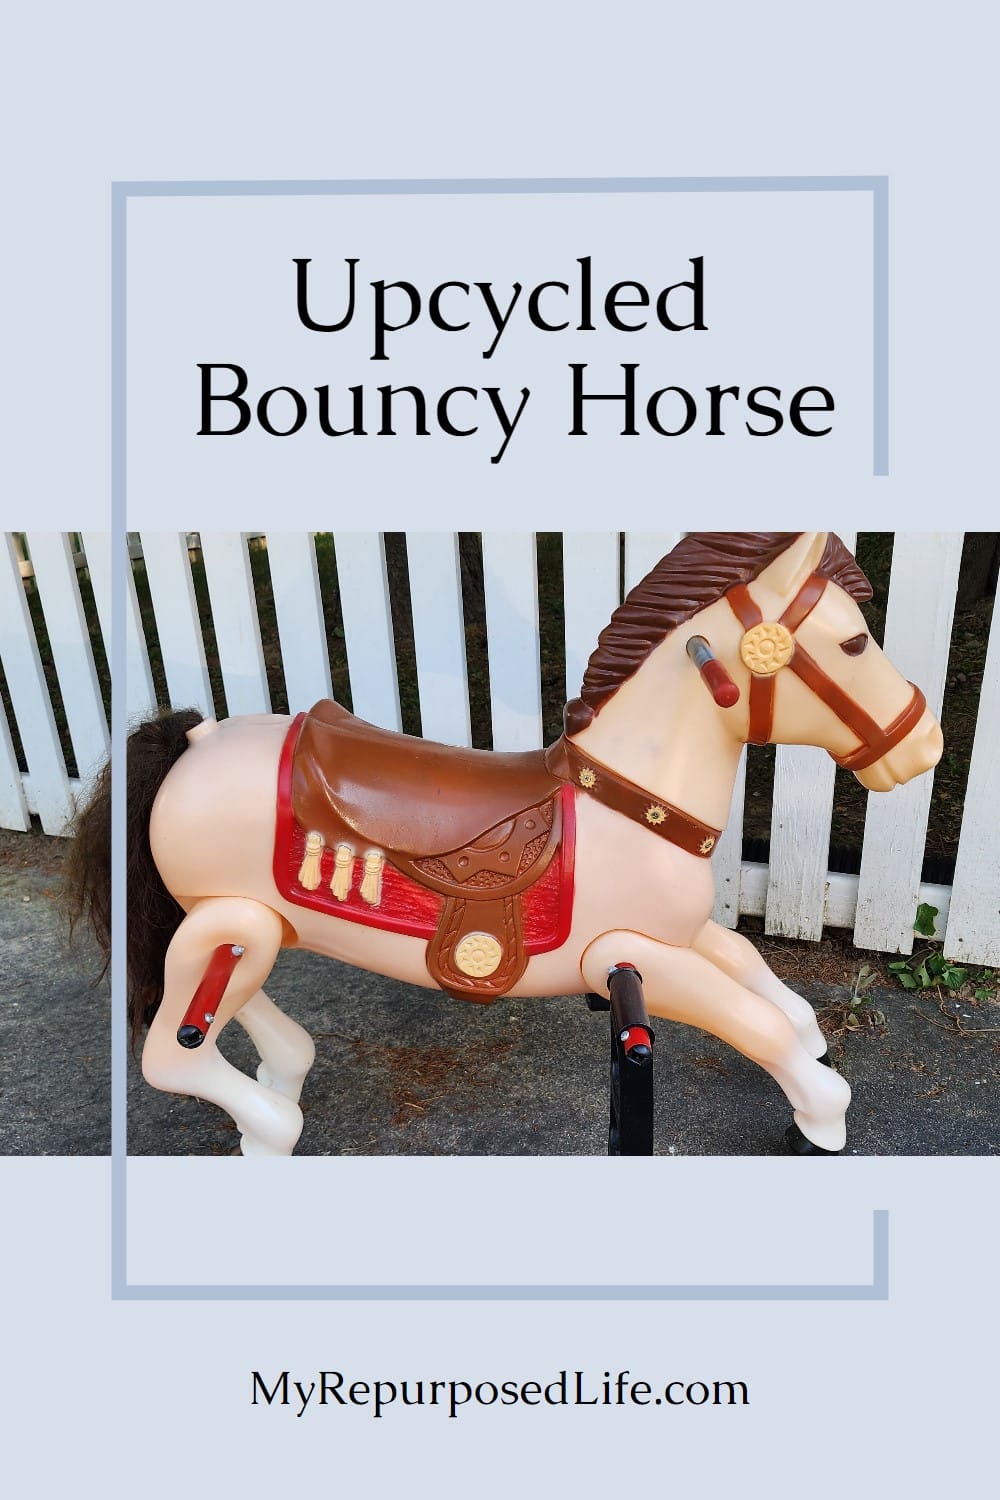 A dumpster find, a bouncy horse becomes a Christmas Carousel Horse. Step by step directions to upcycle a kid's spring rocking horse. via @repurposedlife